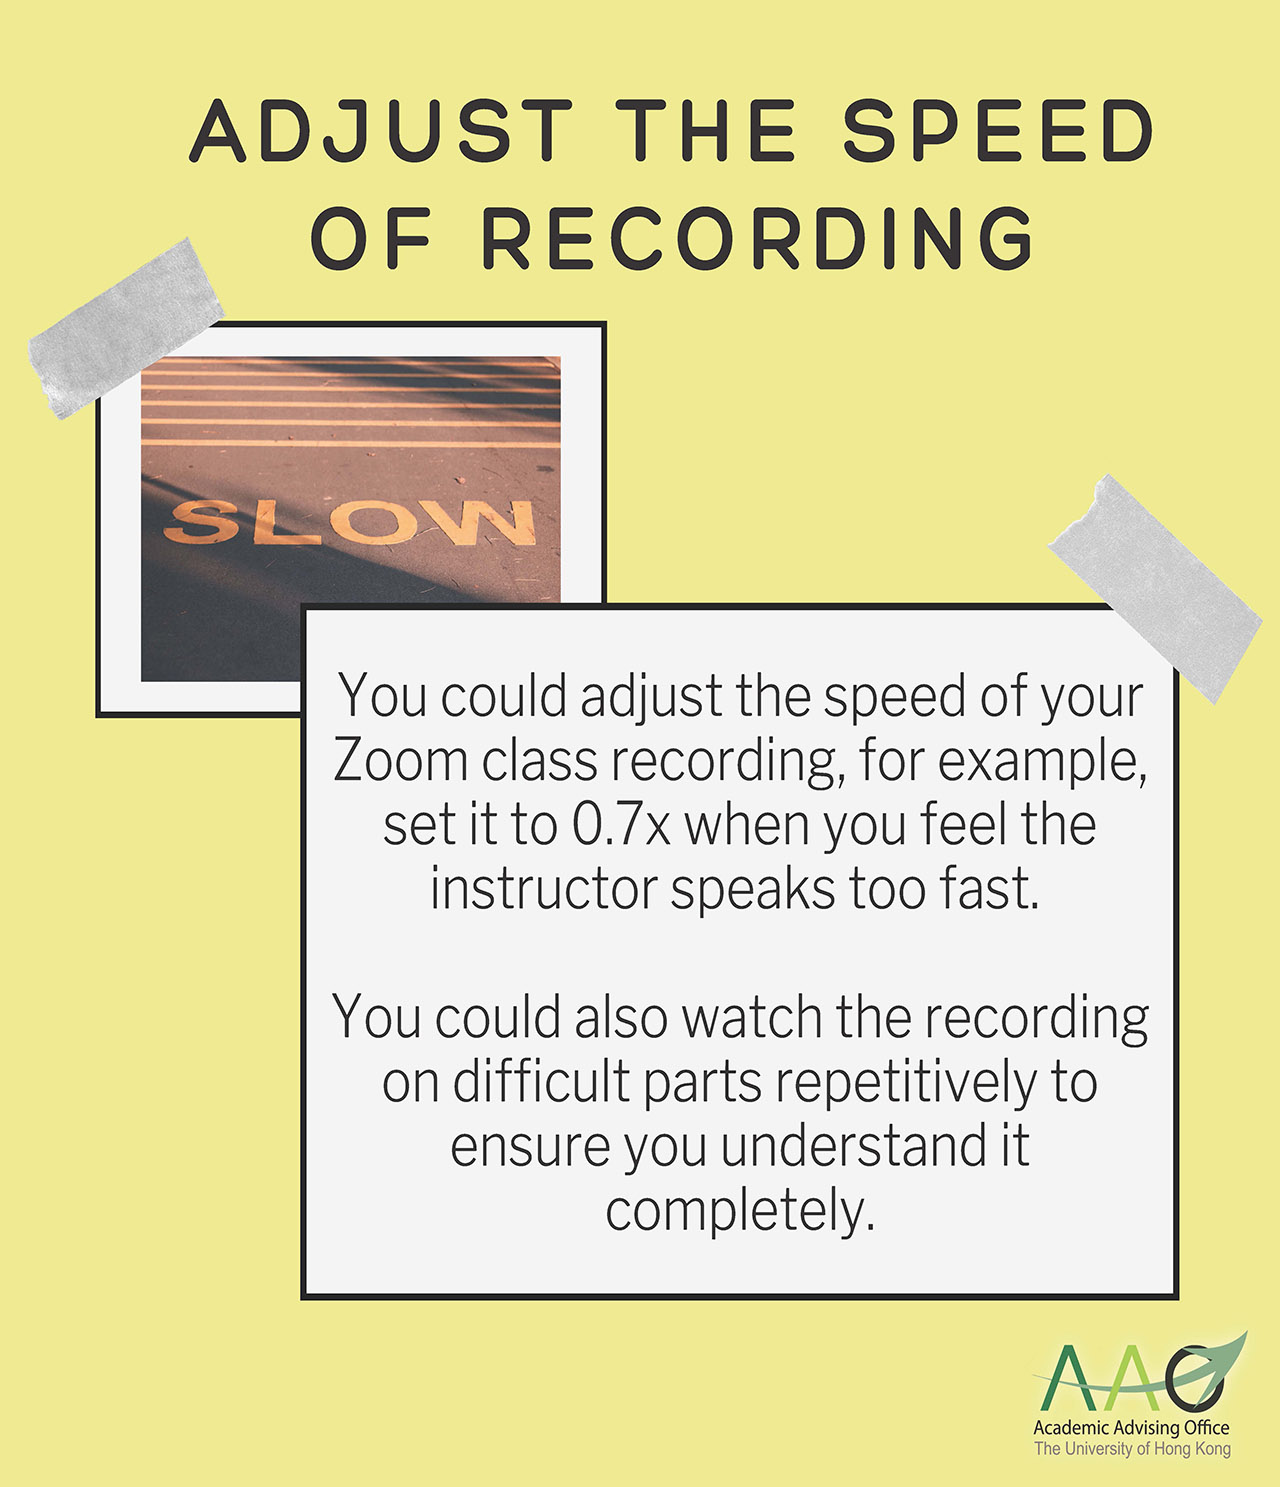 Adjust the speed of recording. You could adjust the speed of your Zoom class recording, for example, set it to 0.7x when you feel the instructor speaks too fast. You could also watch the recording on difficult parts repetitively to ensure you understand it completely.